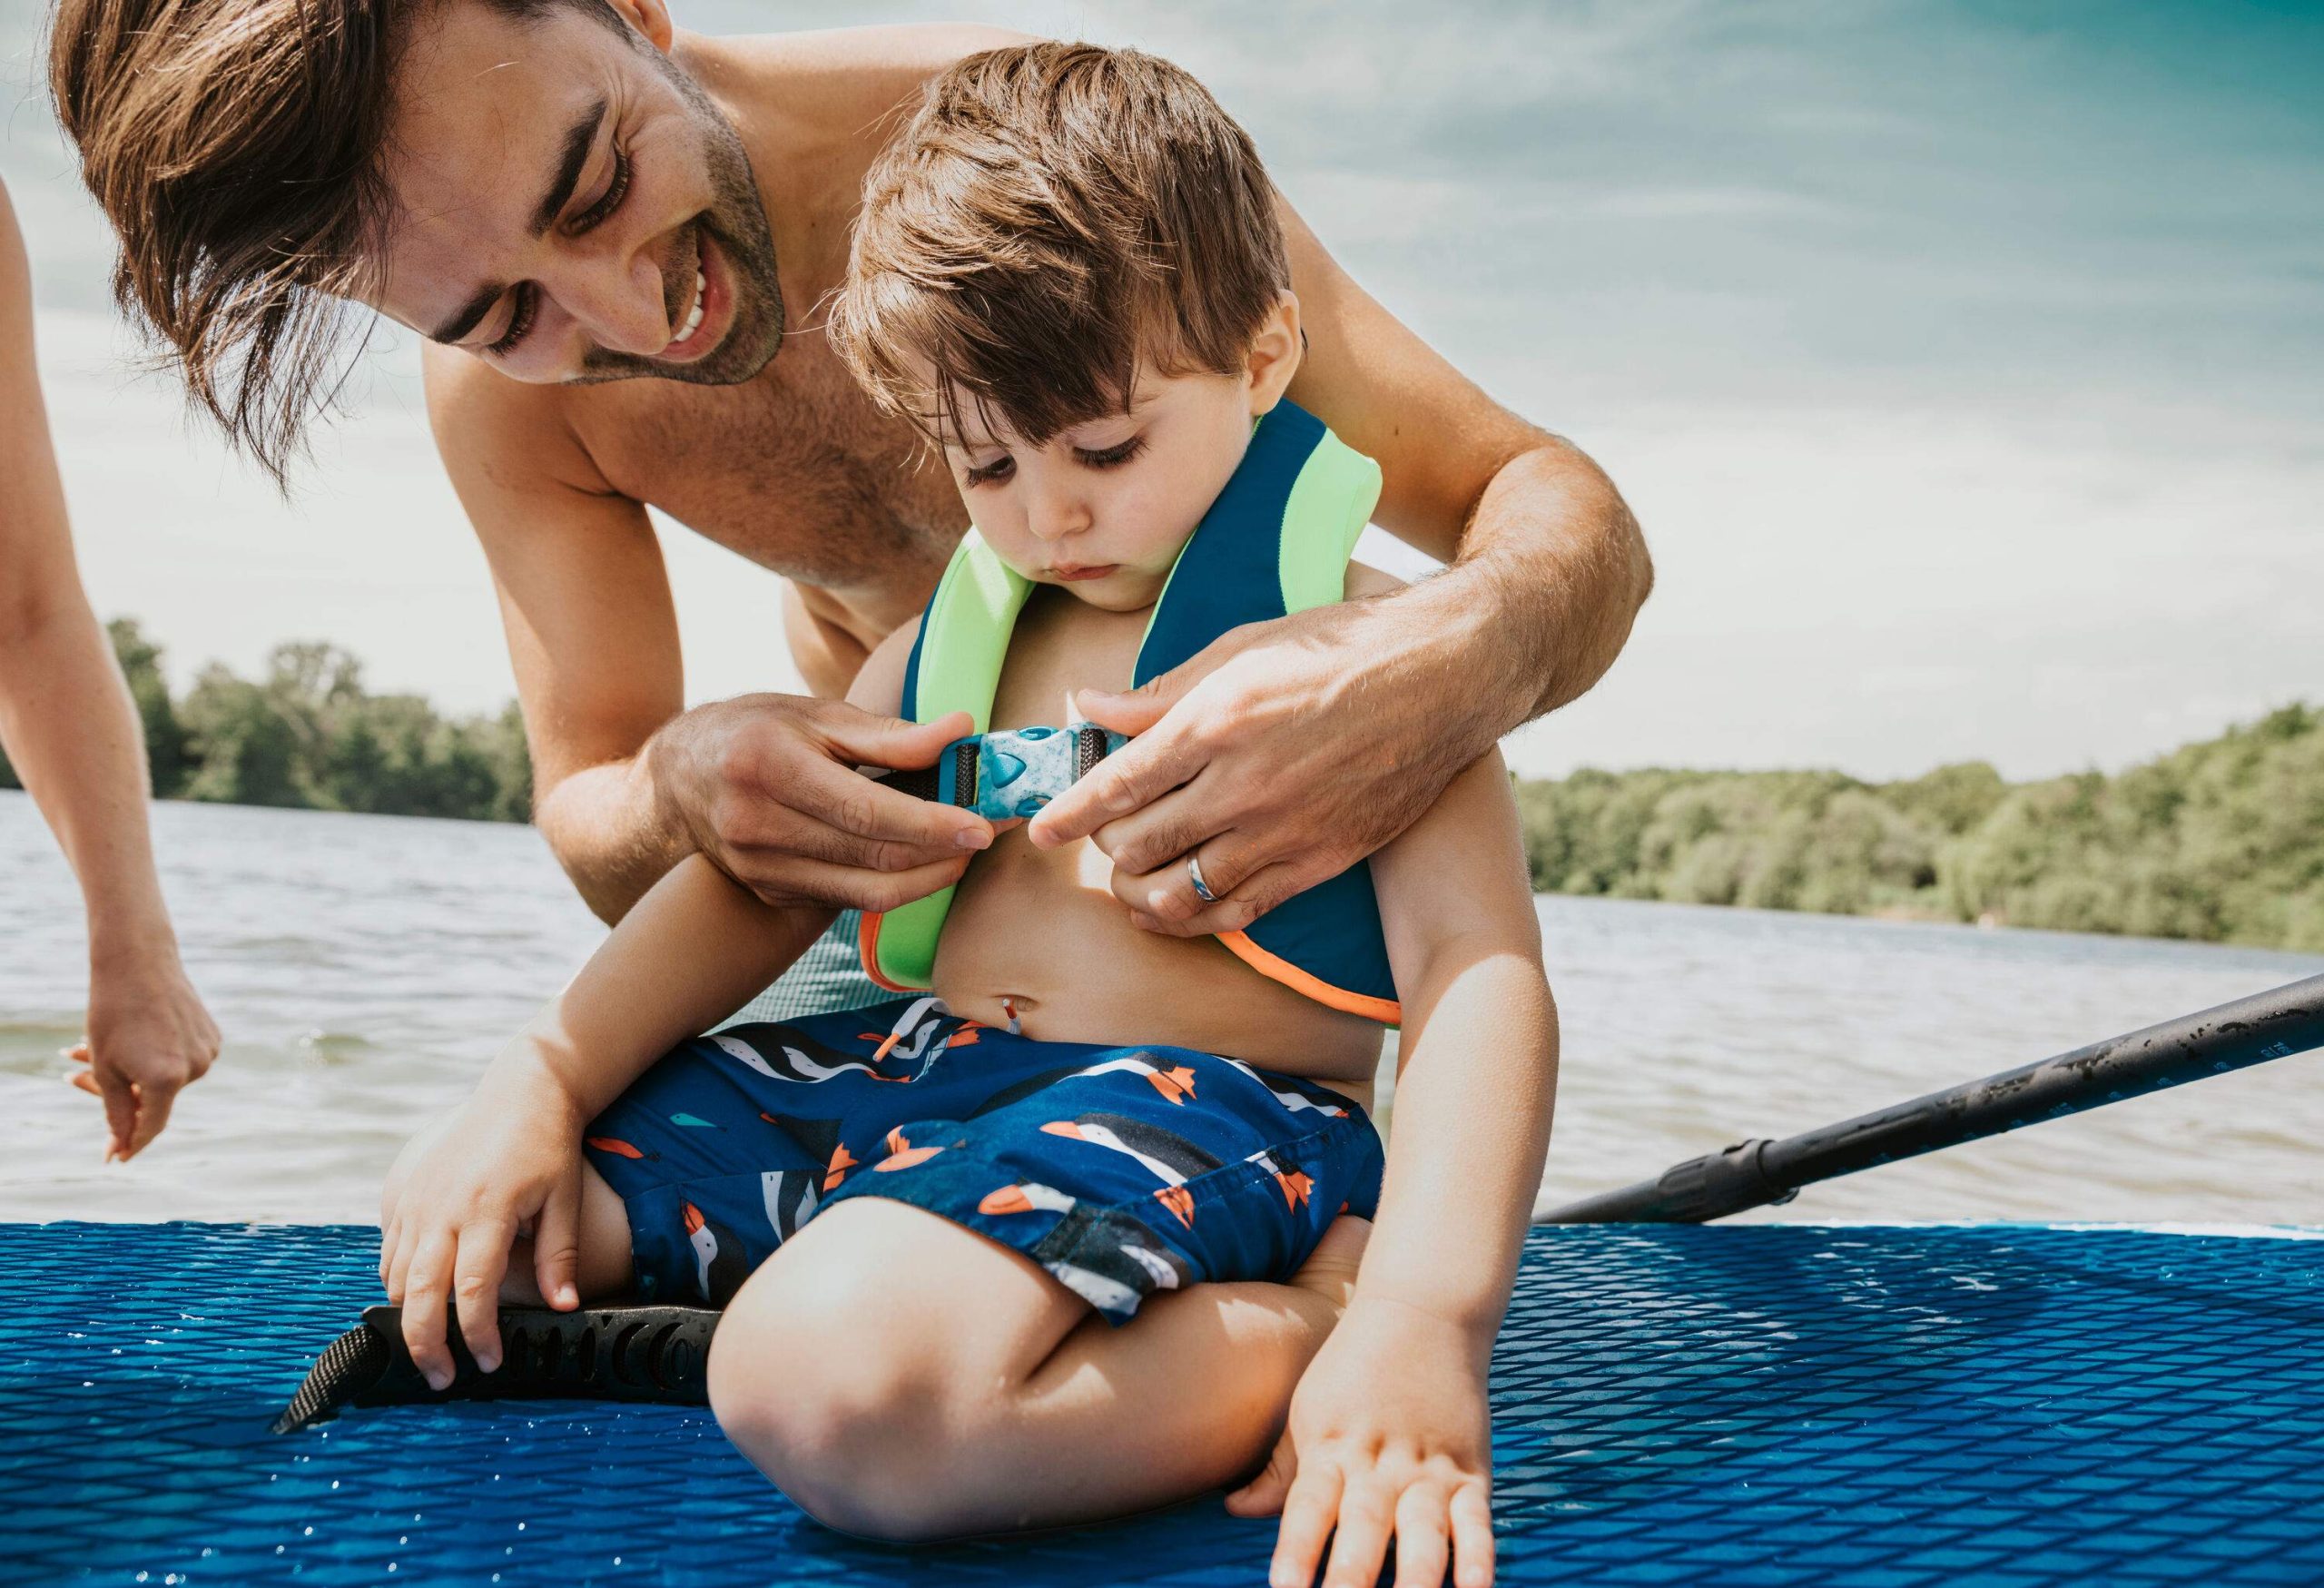 A young man putting a float vest on a little boy sitting on a paddleboard.